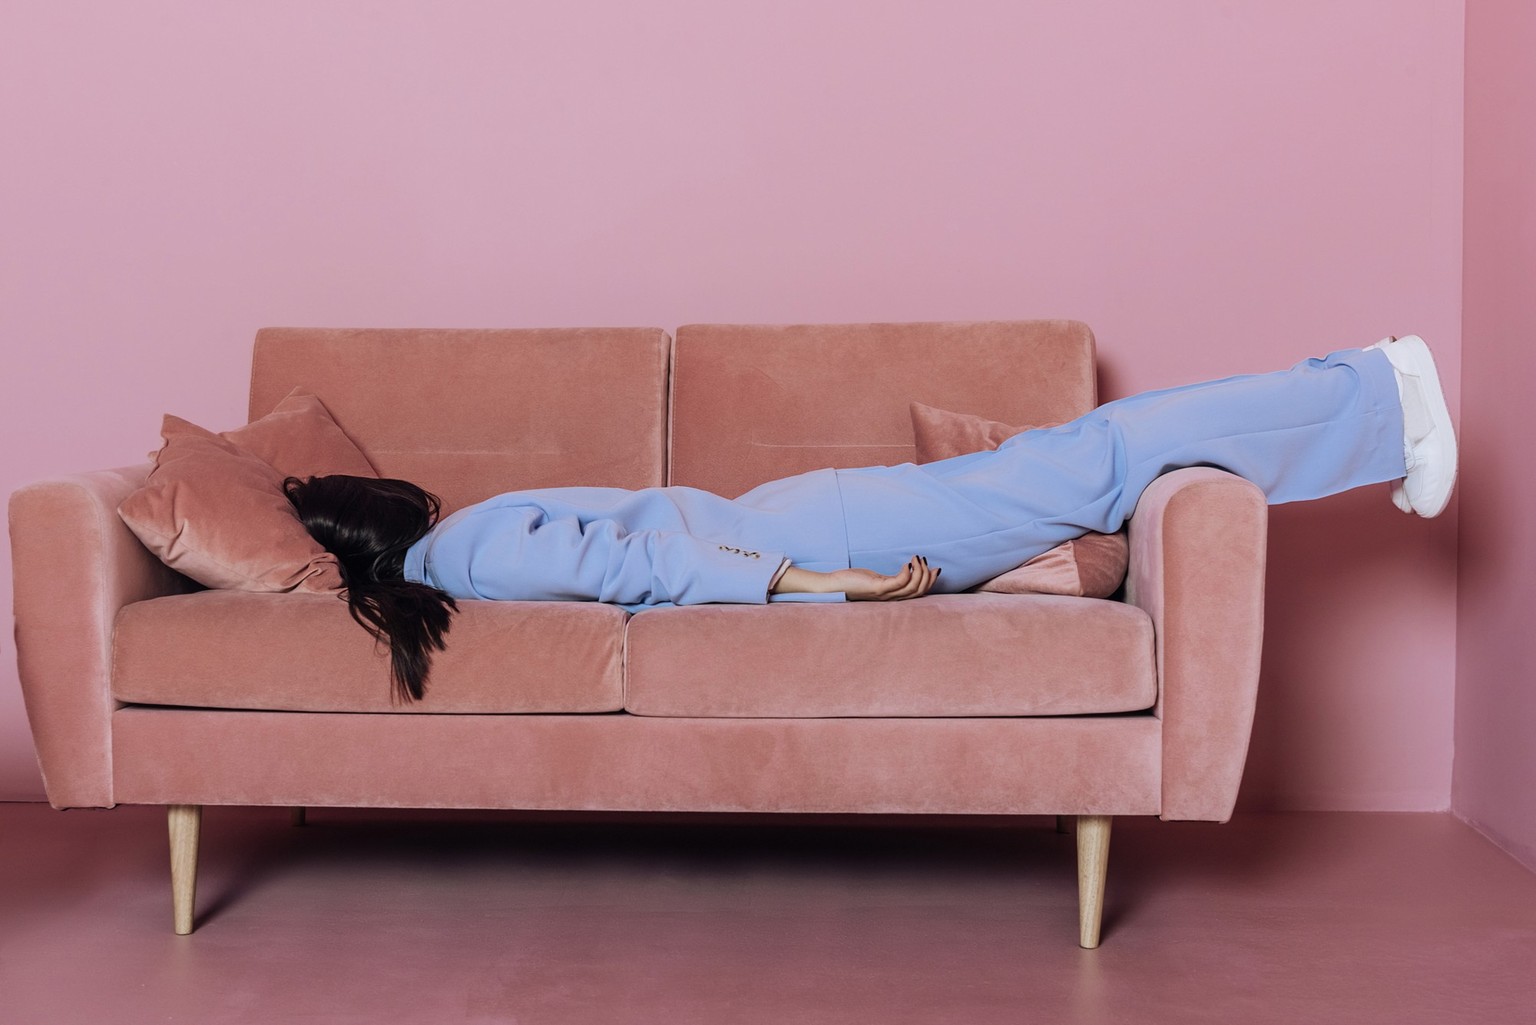 Creative portrait of a woman lying in a blue suit on a pink sofa. Fashion concept.